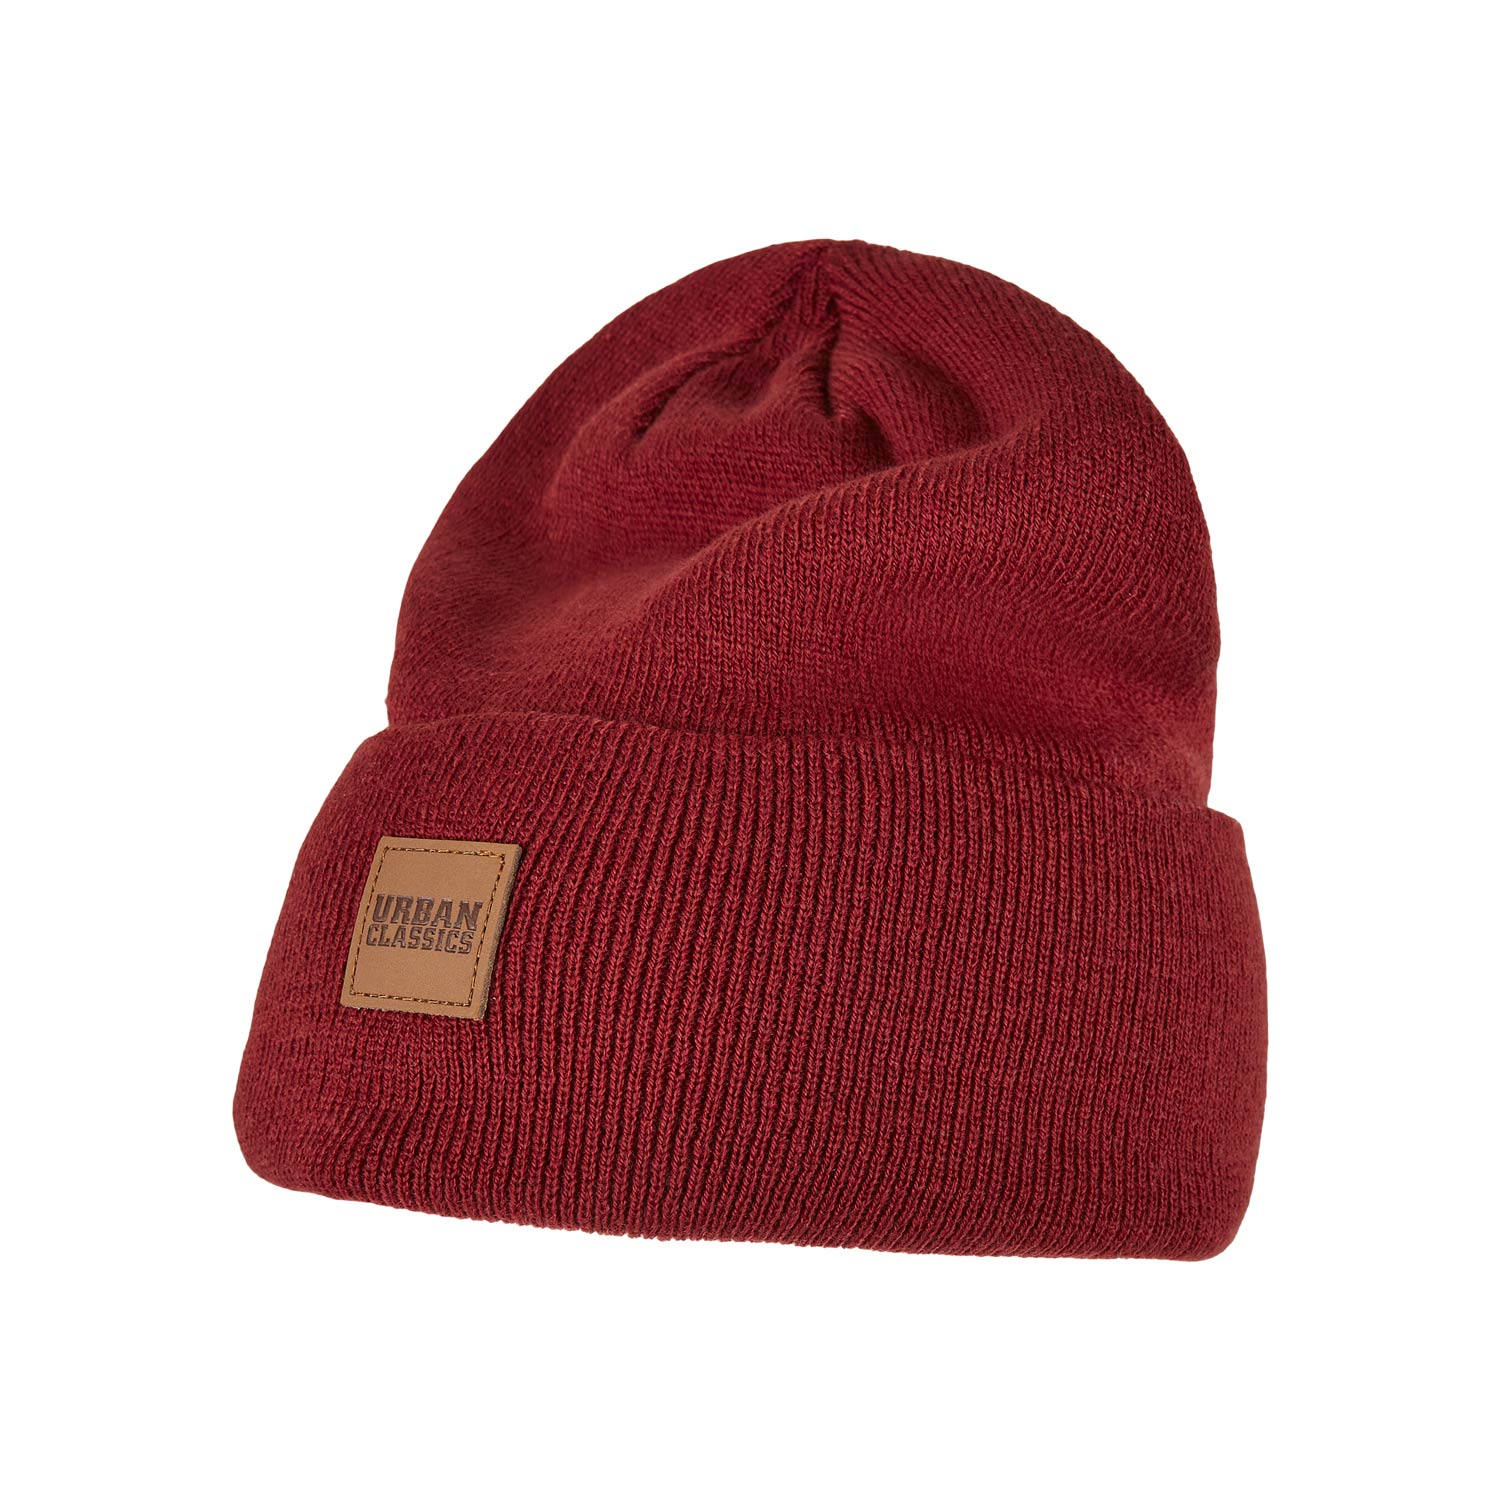 Urban Classics Beanie Synthetic Leatherpatch Long (burgundy)